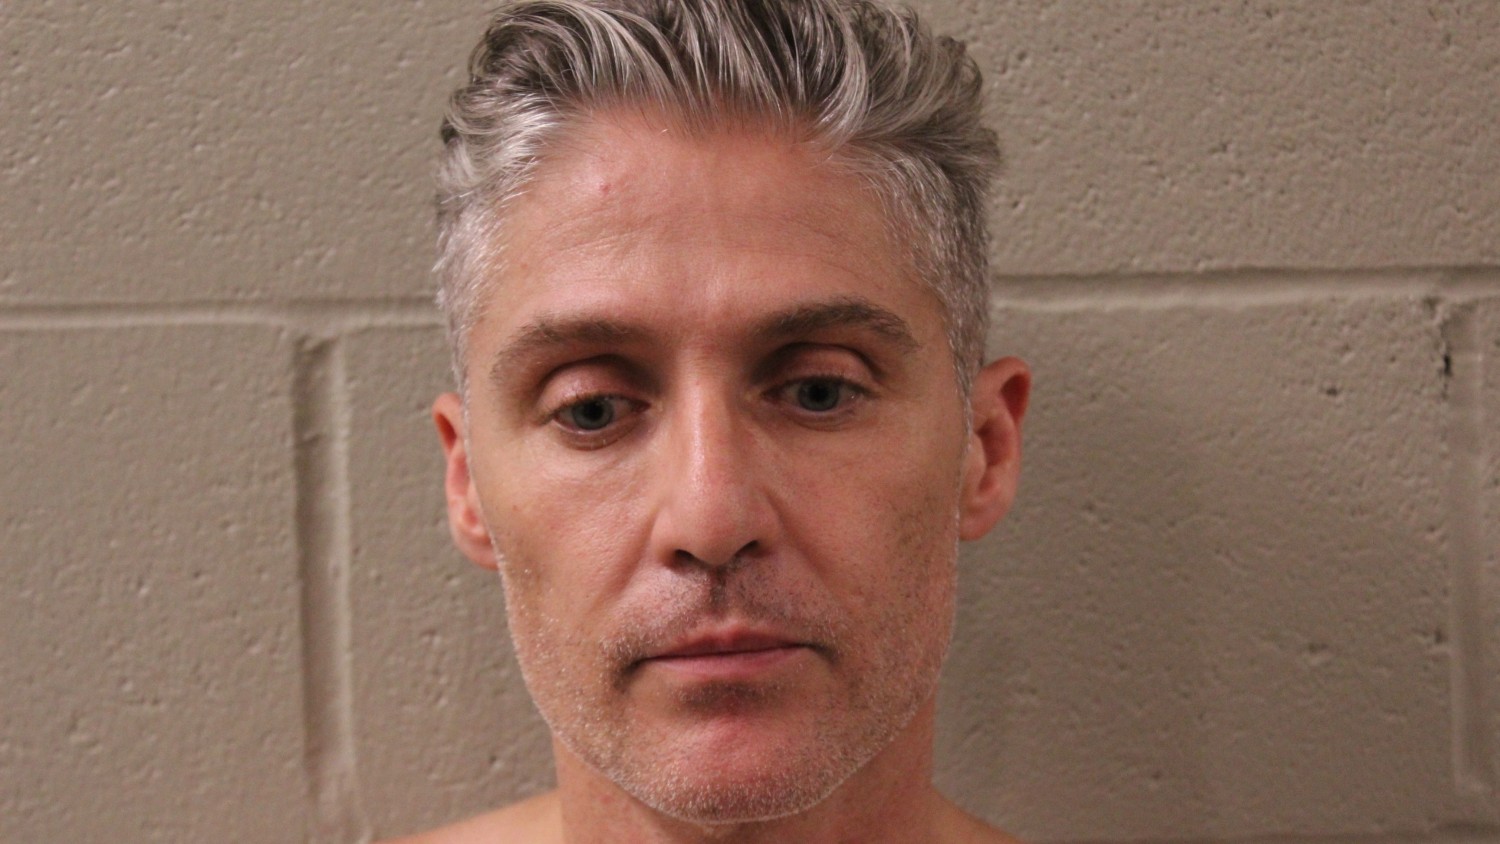 Timothy Stephenson was sentenced to 16 years in prison earlier this month for killing a man he met at a bar in 1998. Benton County Sheriff's Office